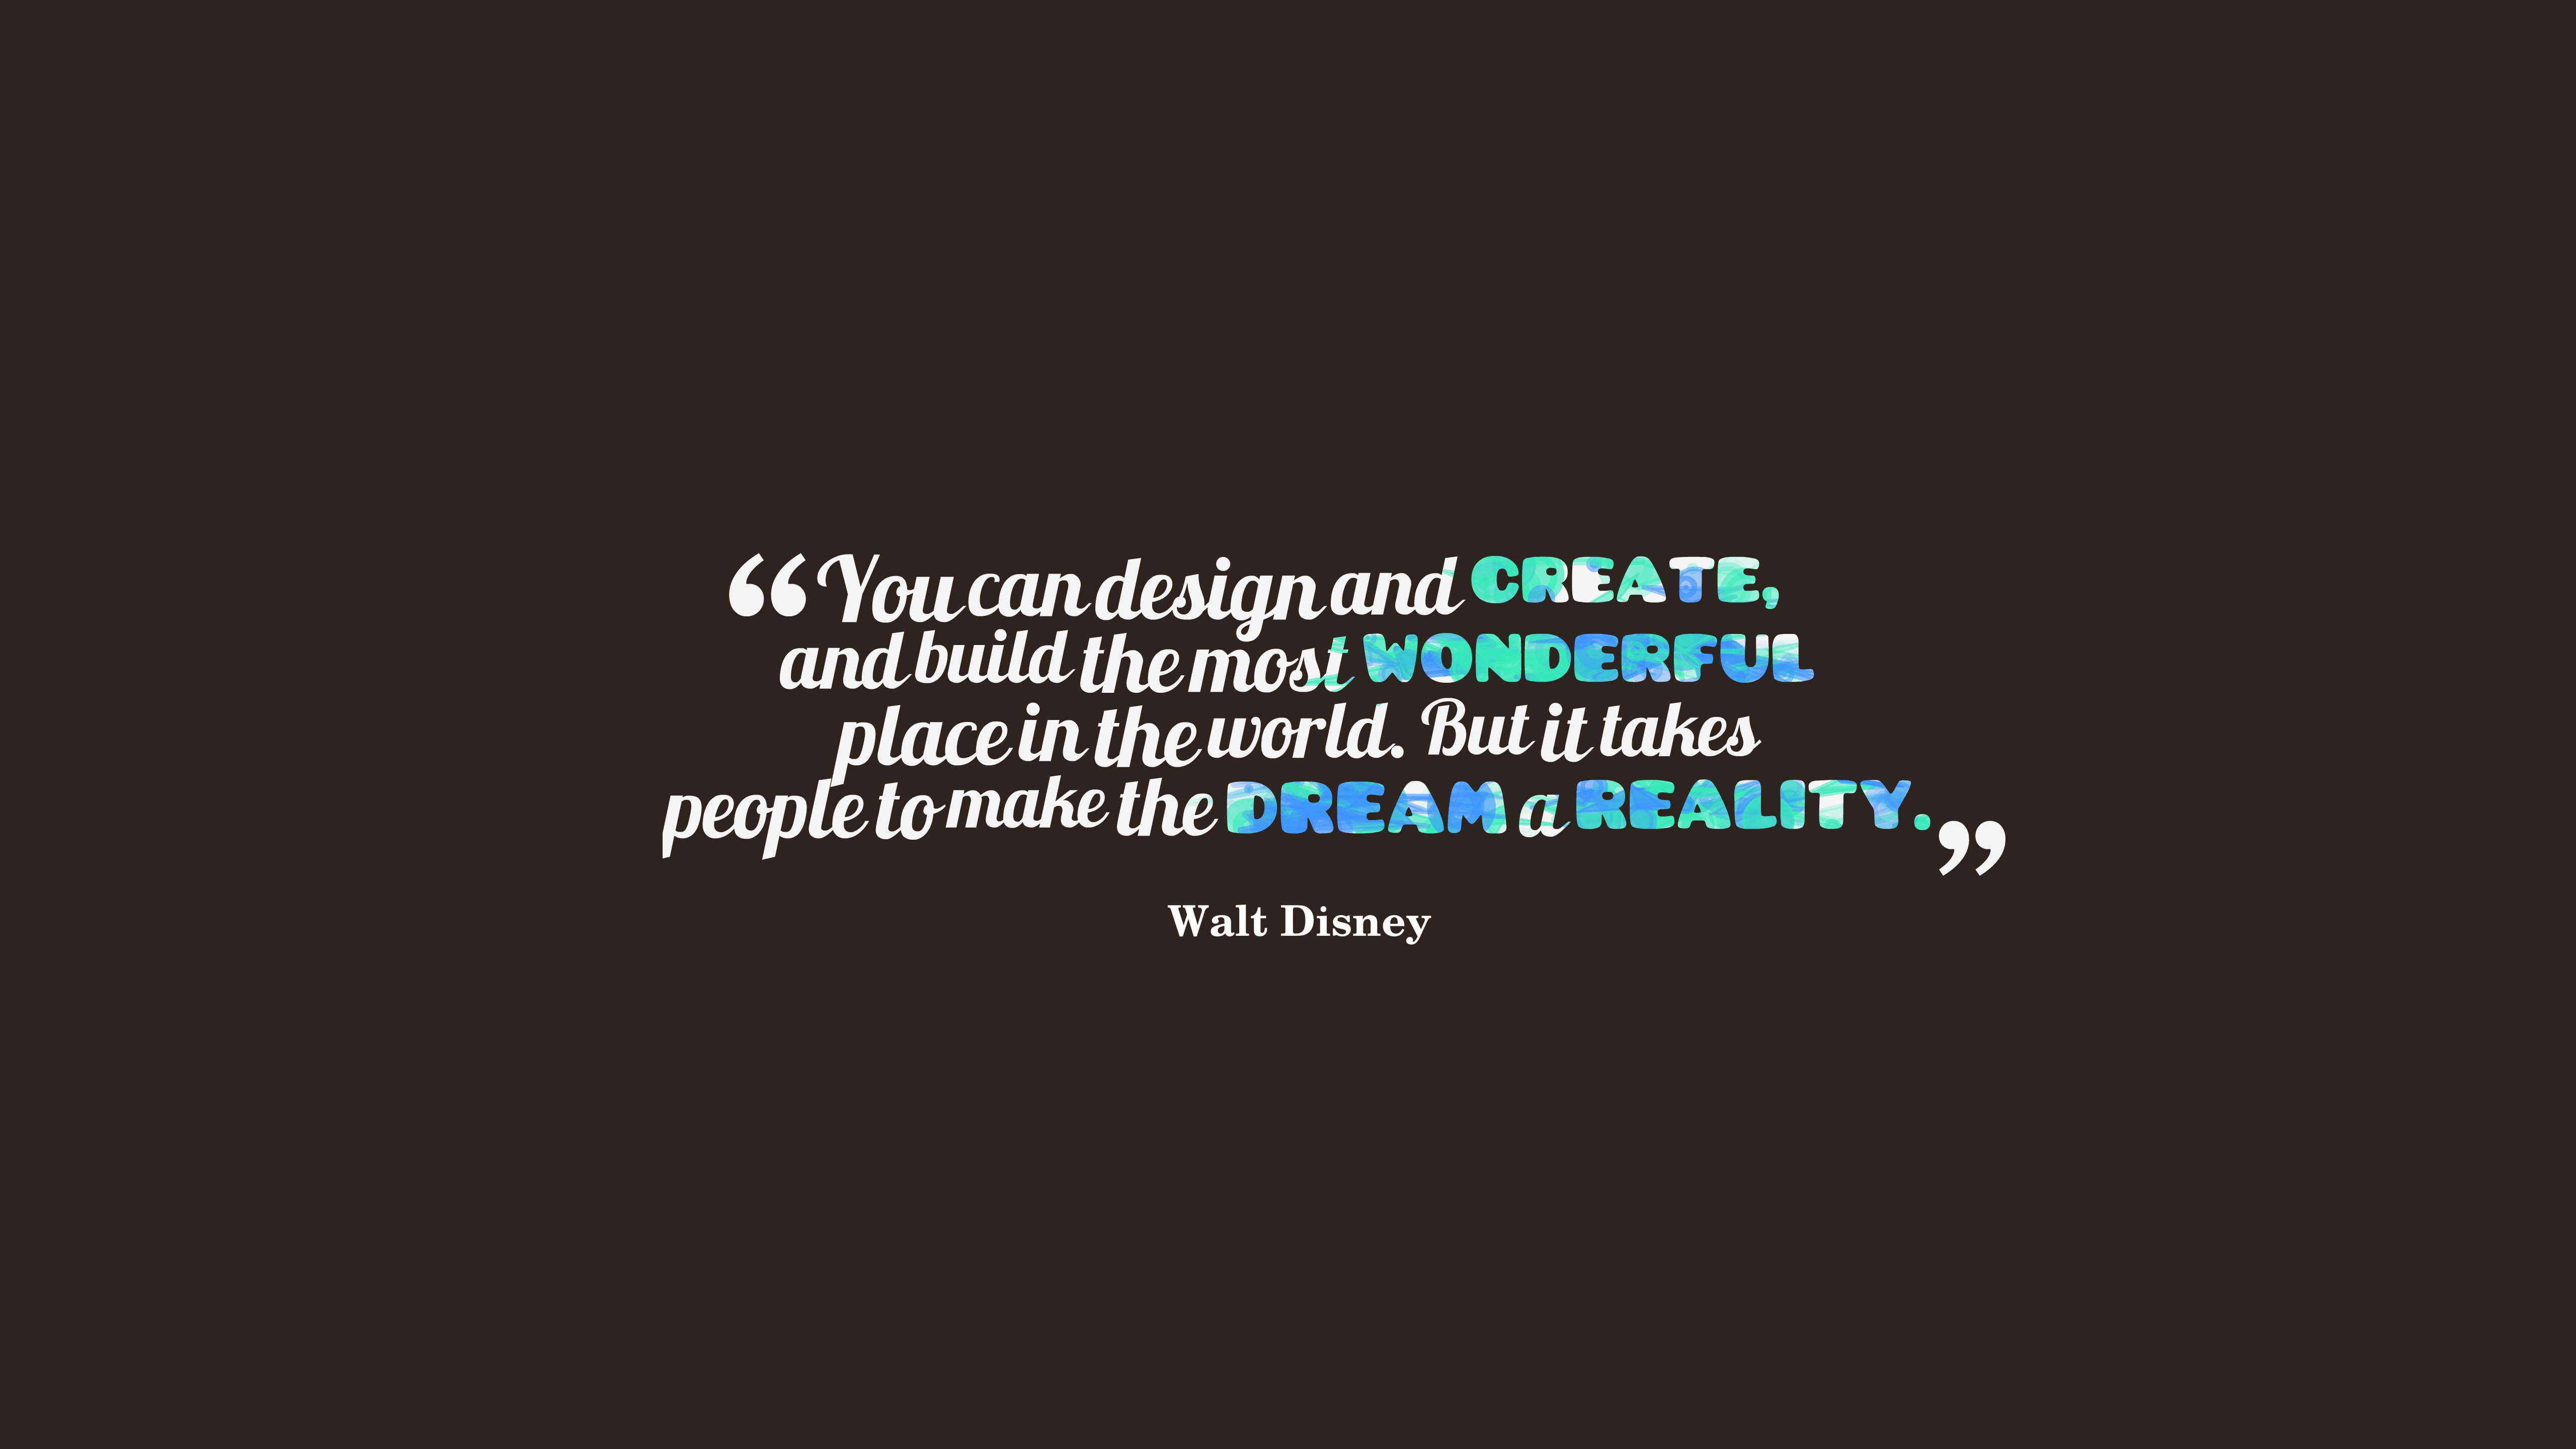 Walt Disney quote text, typography, brown background, communication